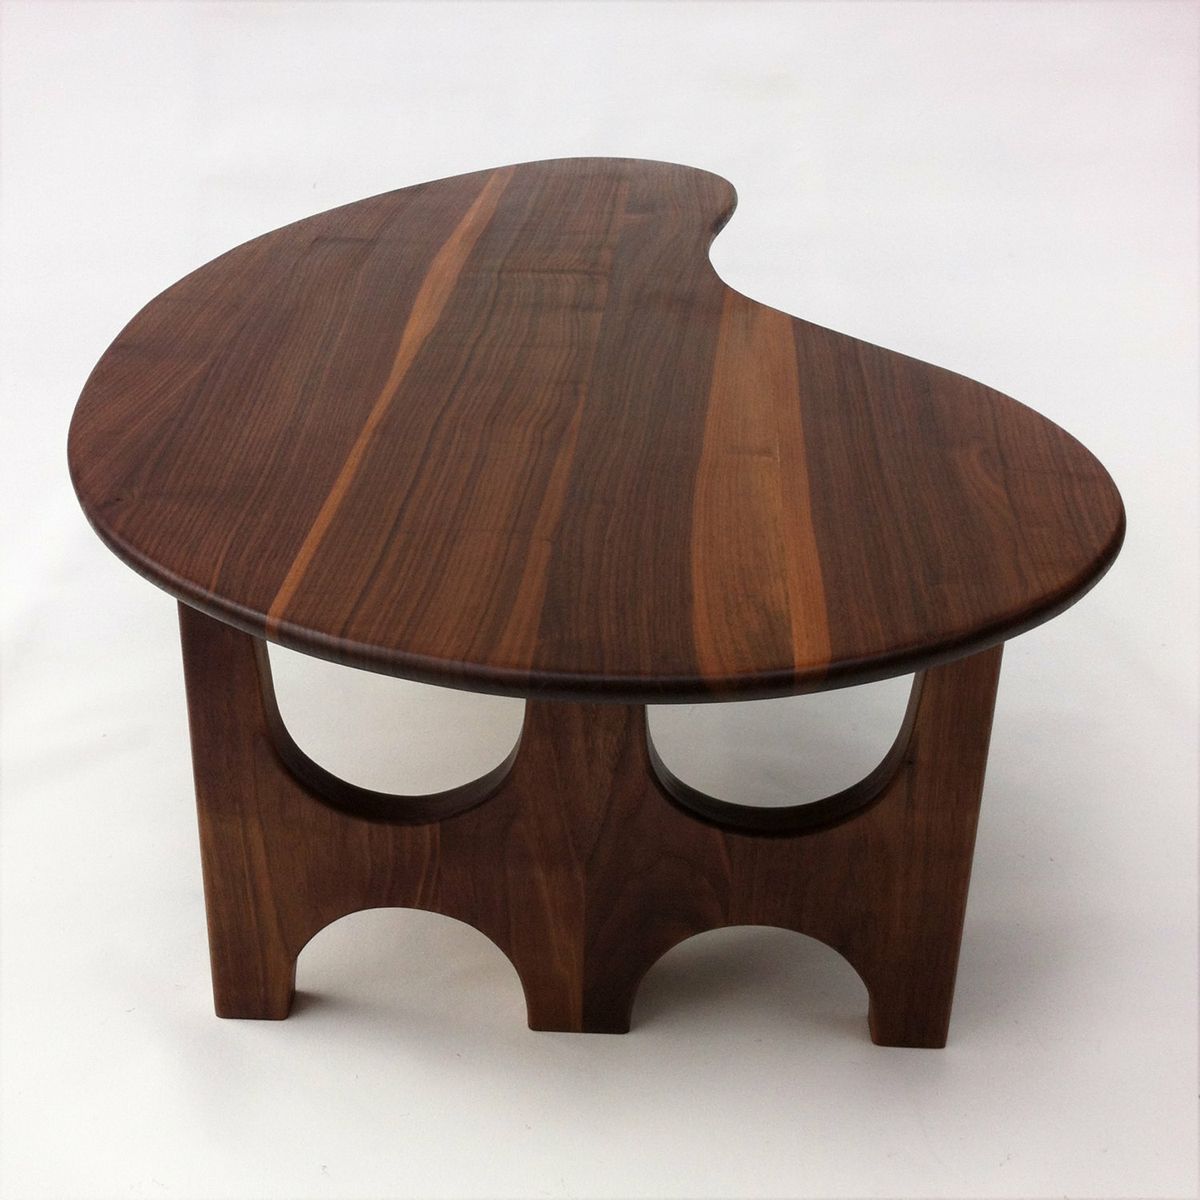 Buy Handmade Coffee Cocktail Table With Trident Base Made Of Solid Walnut Kidney Bean Shaped Made To Order From Studio1212 Custommade Com